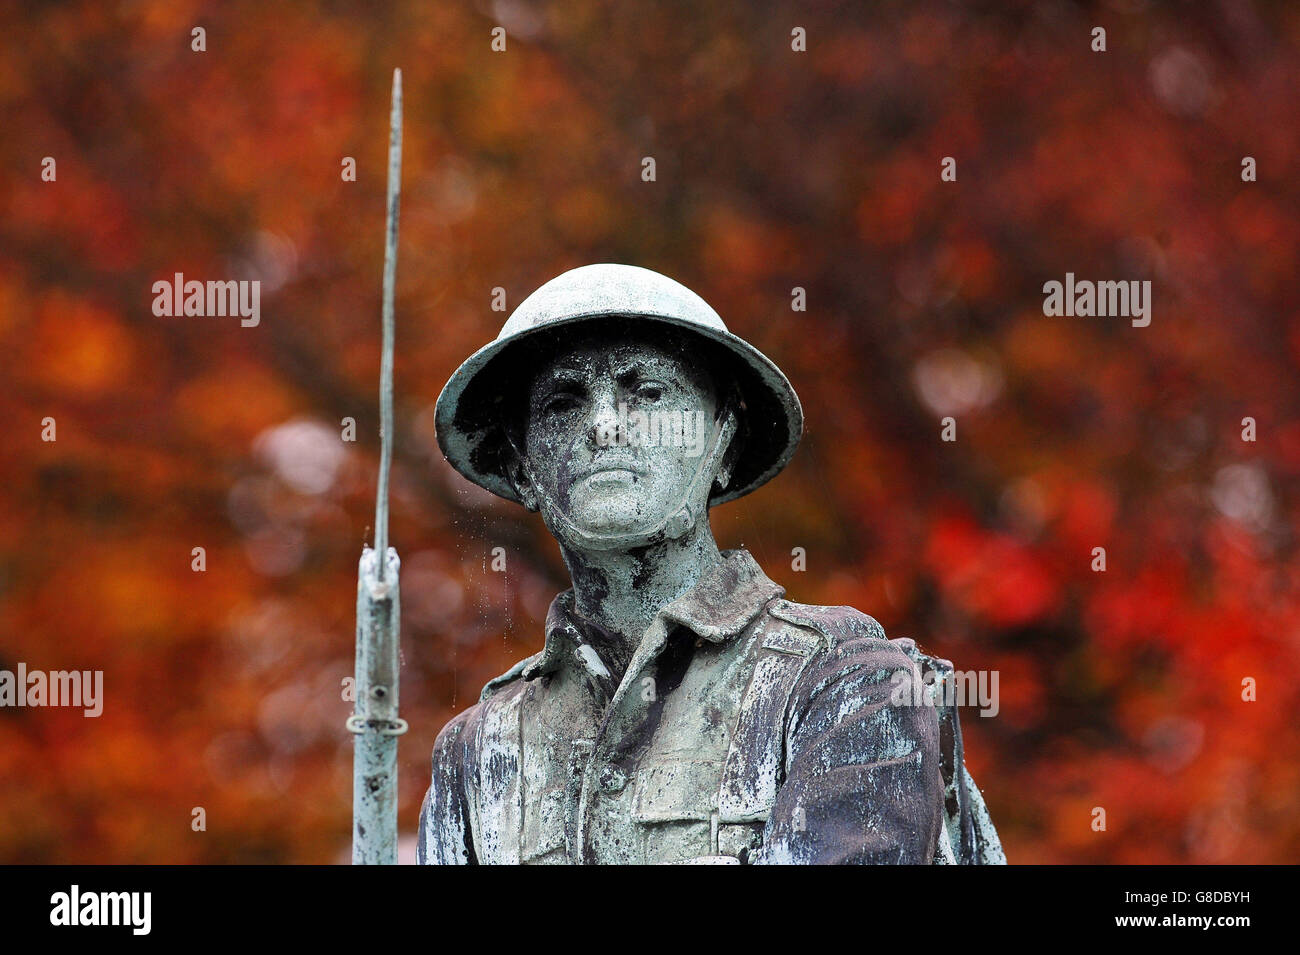 A soldier of the Great War on the War Memorial at Shildon, County Durham, against a backdrop of trees in autumn colour, as the nation prepares to remember its fallen service men and women with Remembrance Services to be held across the UK over the next few days. Stock Photo